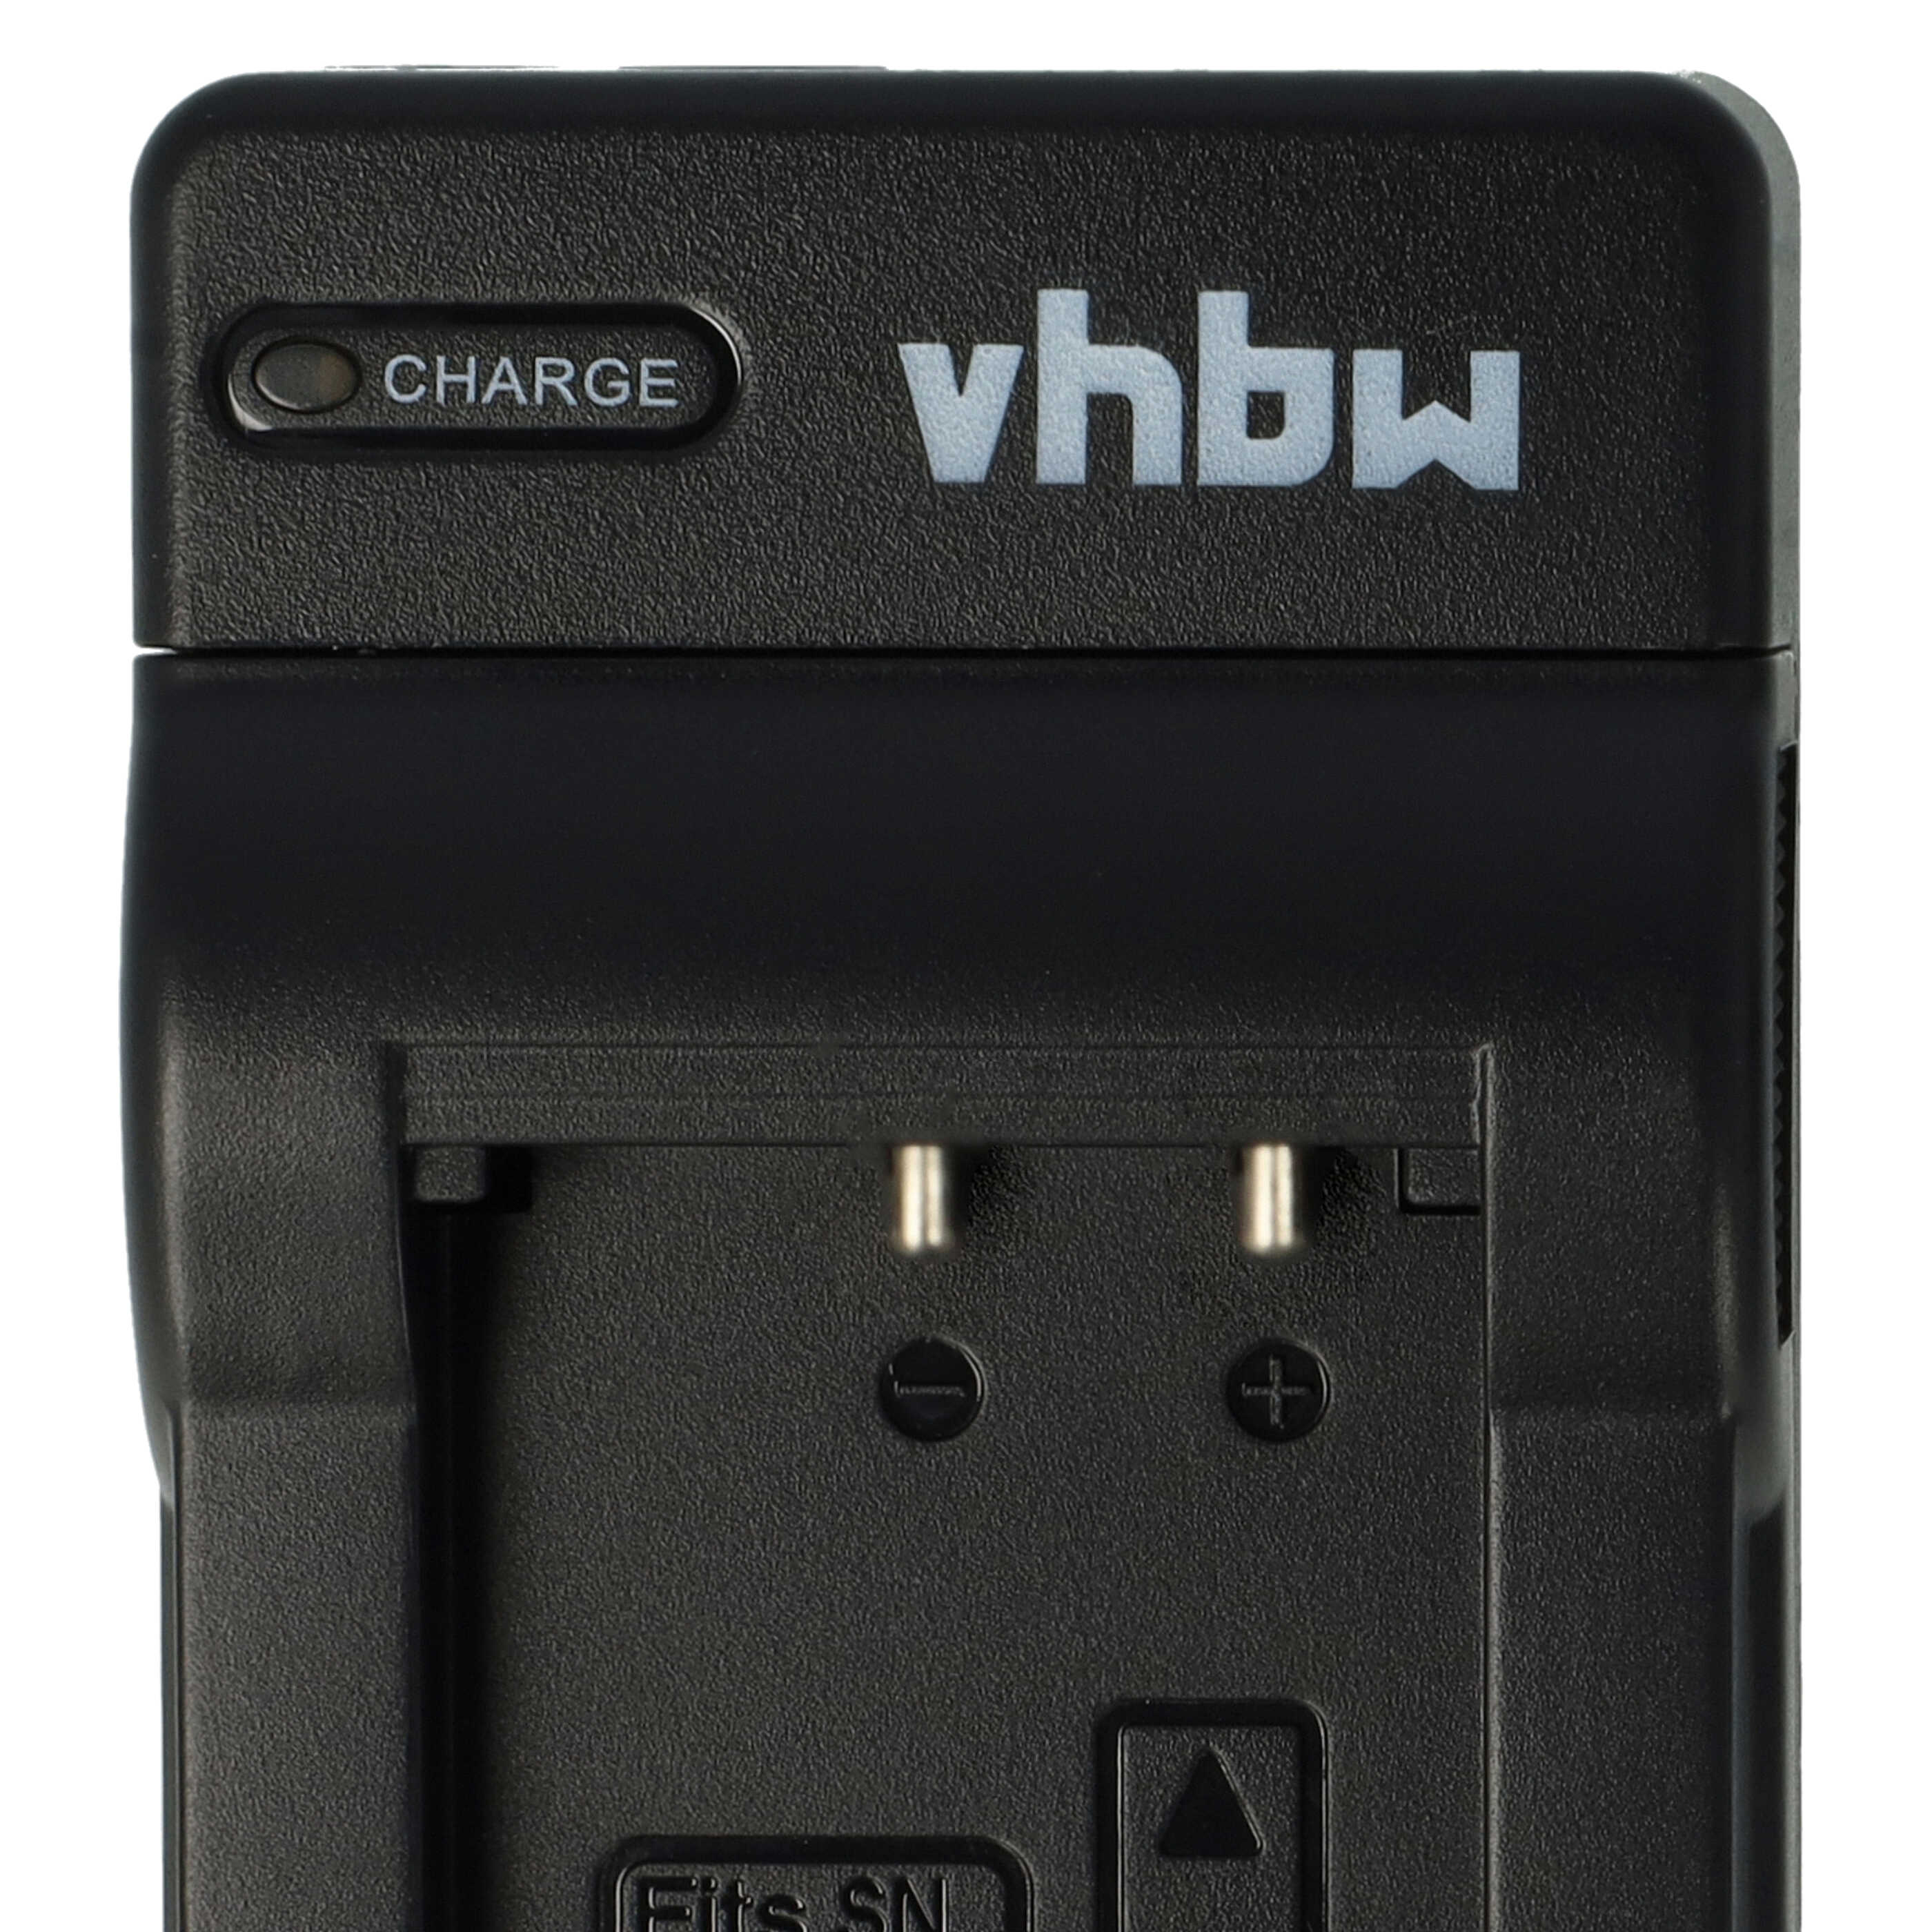 Battery Charger replaces Sony BC-CSXB suitable for Sony NP-BX1 Camera etc. - 0.5 A, 4.2 V